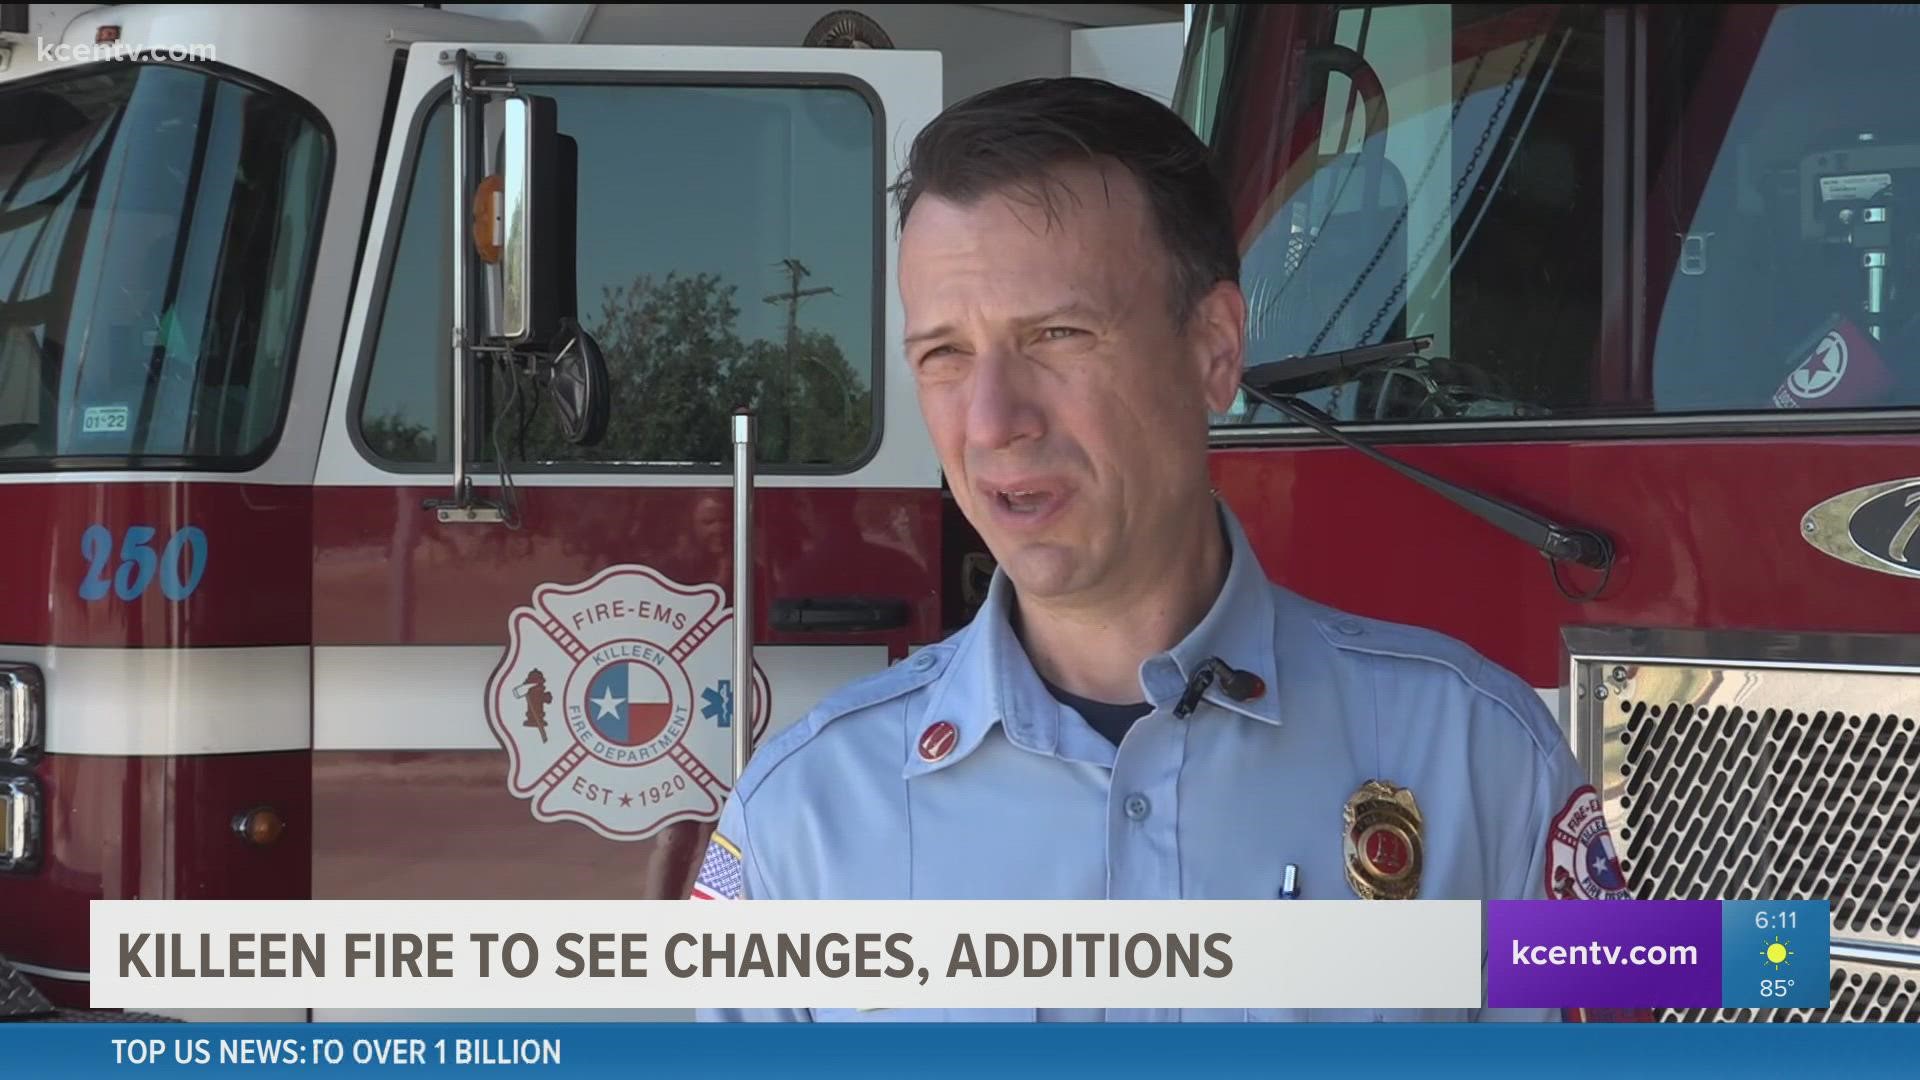 Expect to see more fire crews, ambulances thanks to an increase in budget.